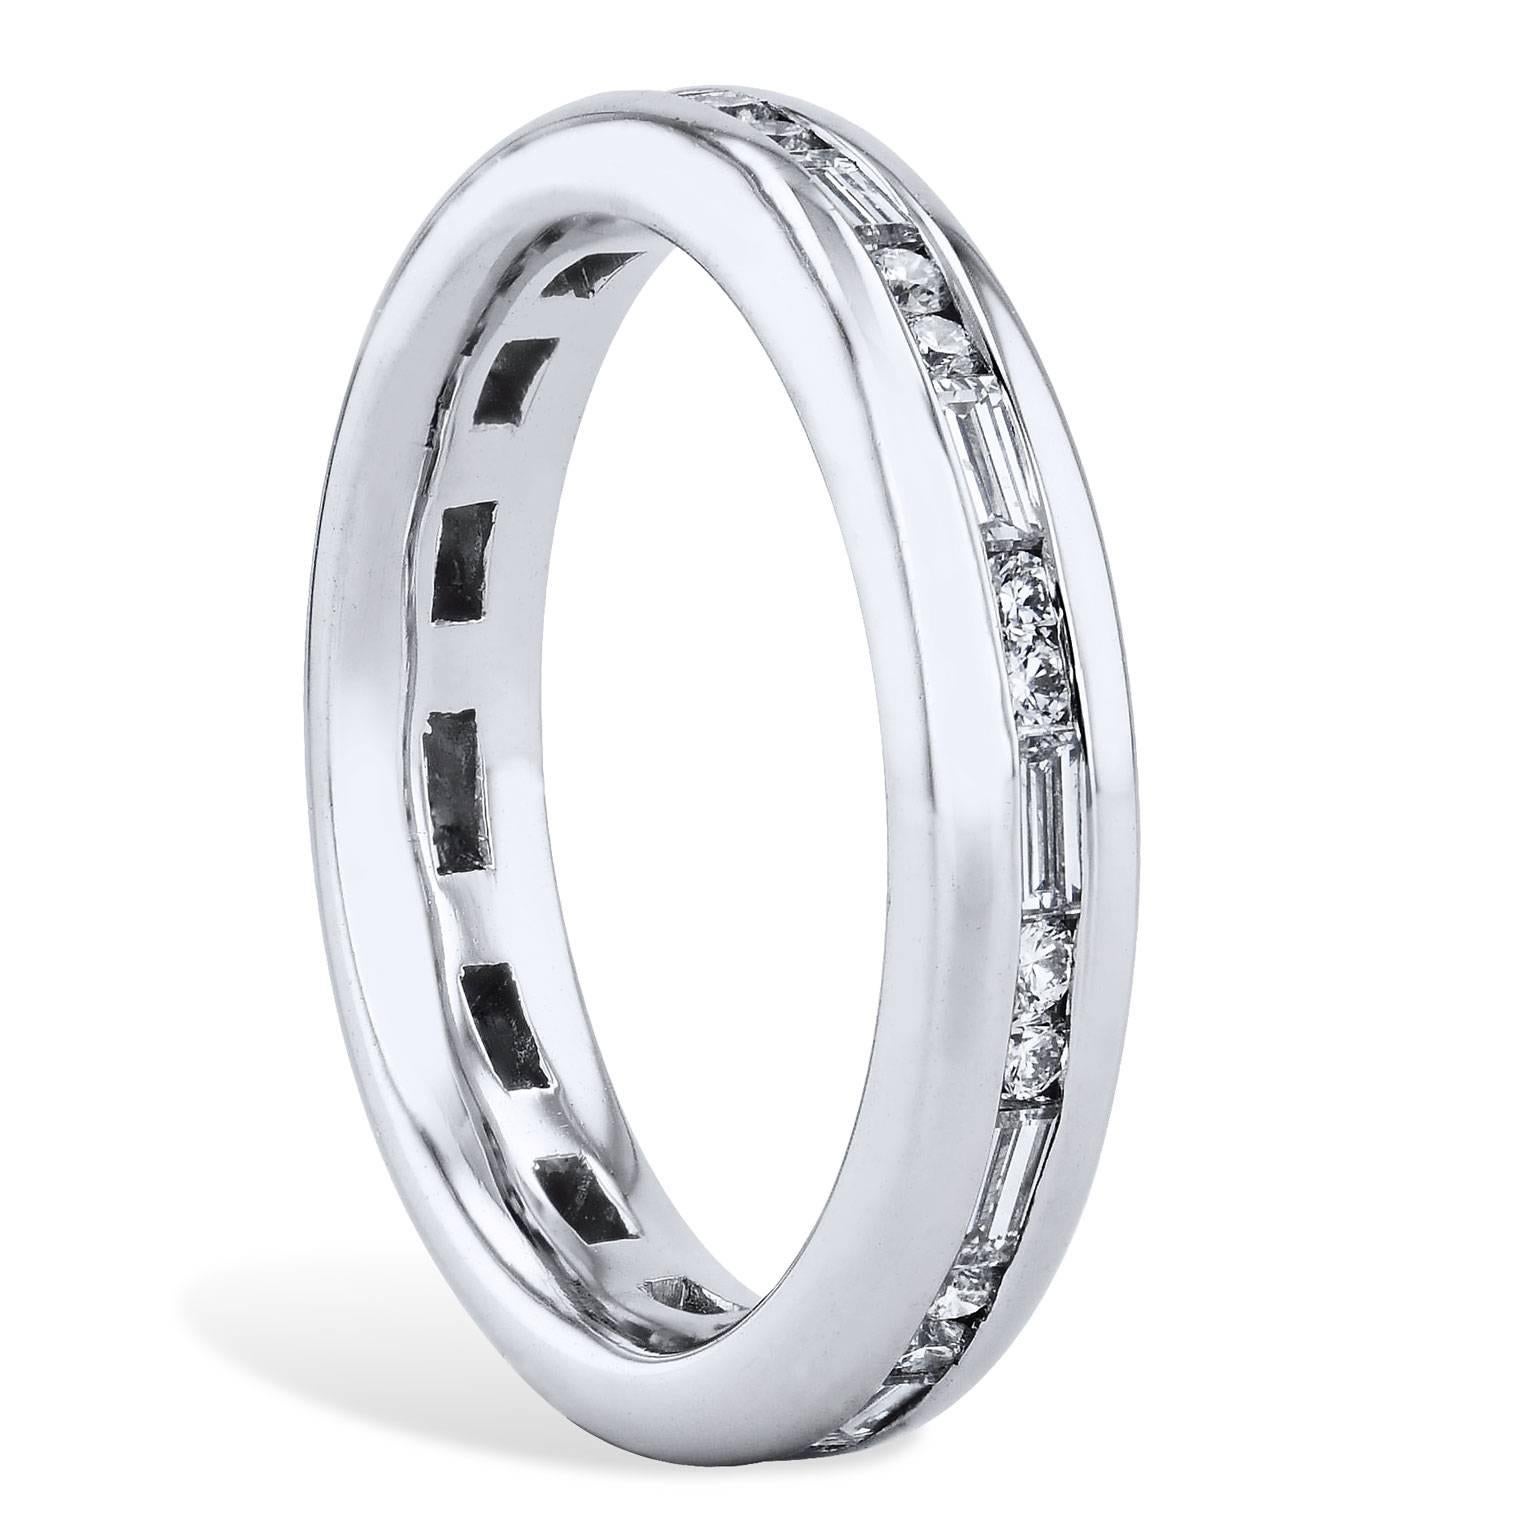 H&H Round Cut and Baguette Cut Diamond Satin Finish Eternity Band Ring

This ring has twenty-two round brilliant cut diamonds and eleven baguette cut diamonds totaling 0.30 carat of round (F/G/VS1) and 0.52 carat of baguette diamonds.  These